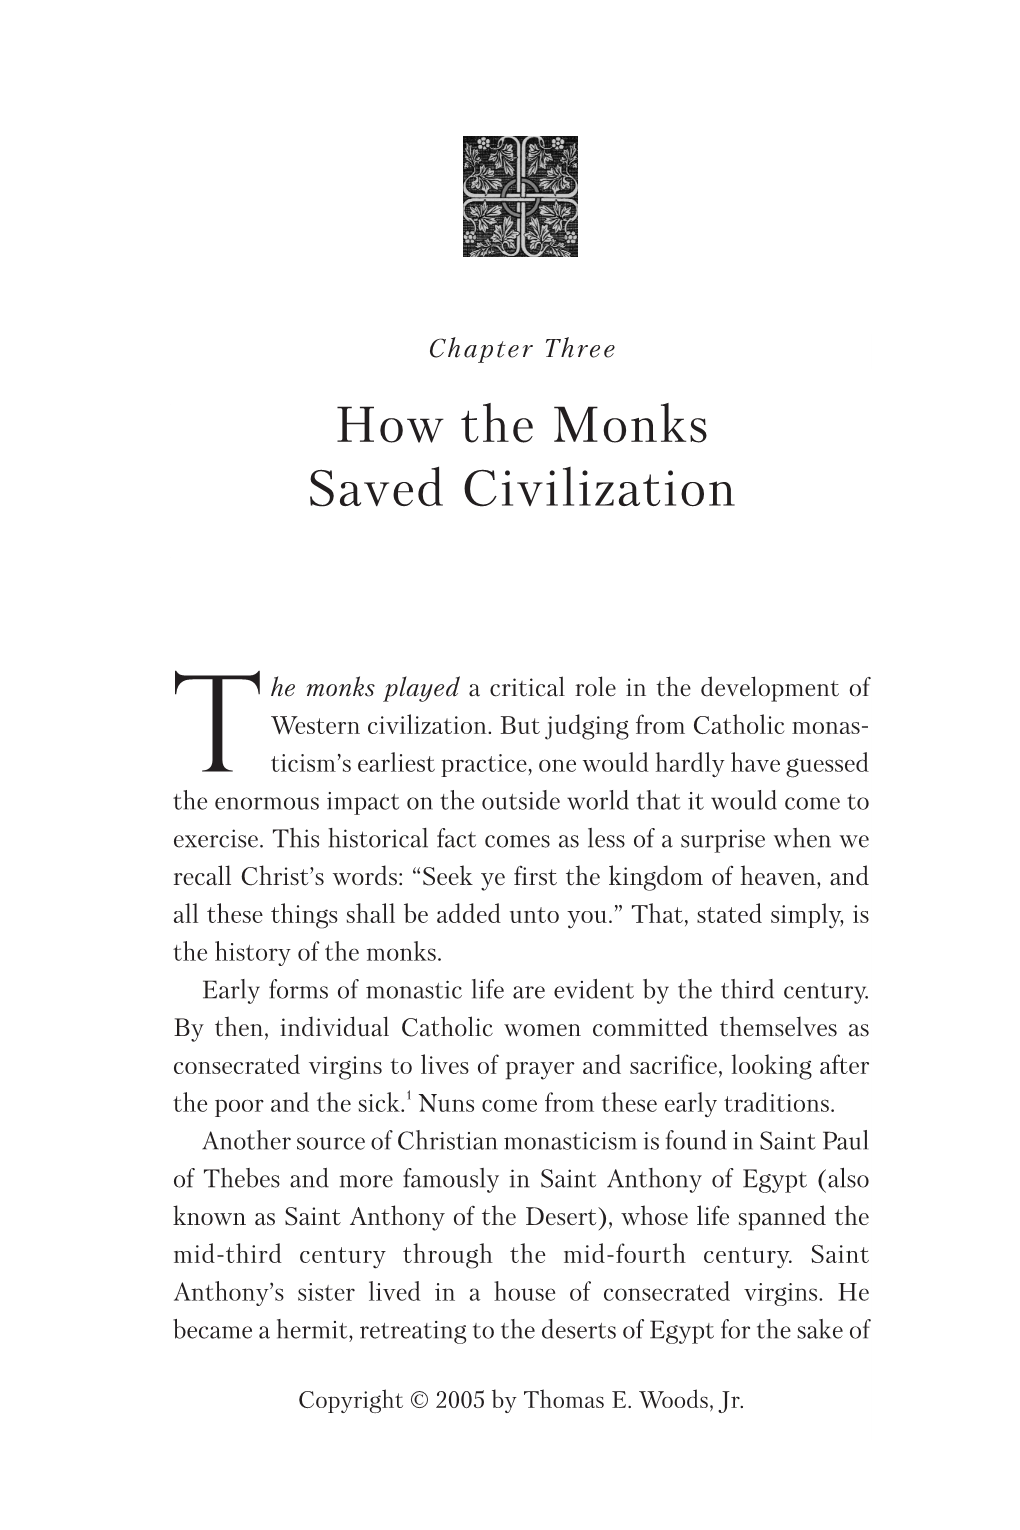 How the Monks Saved Civilization